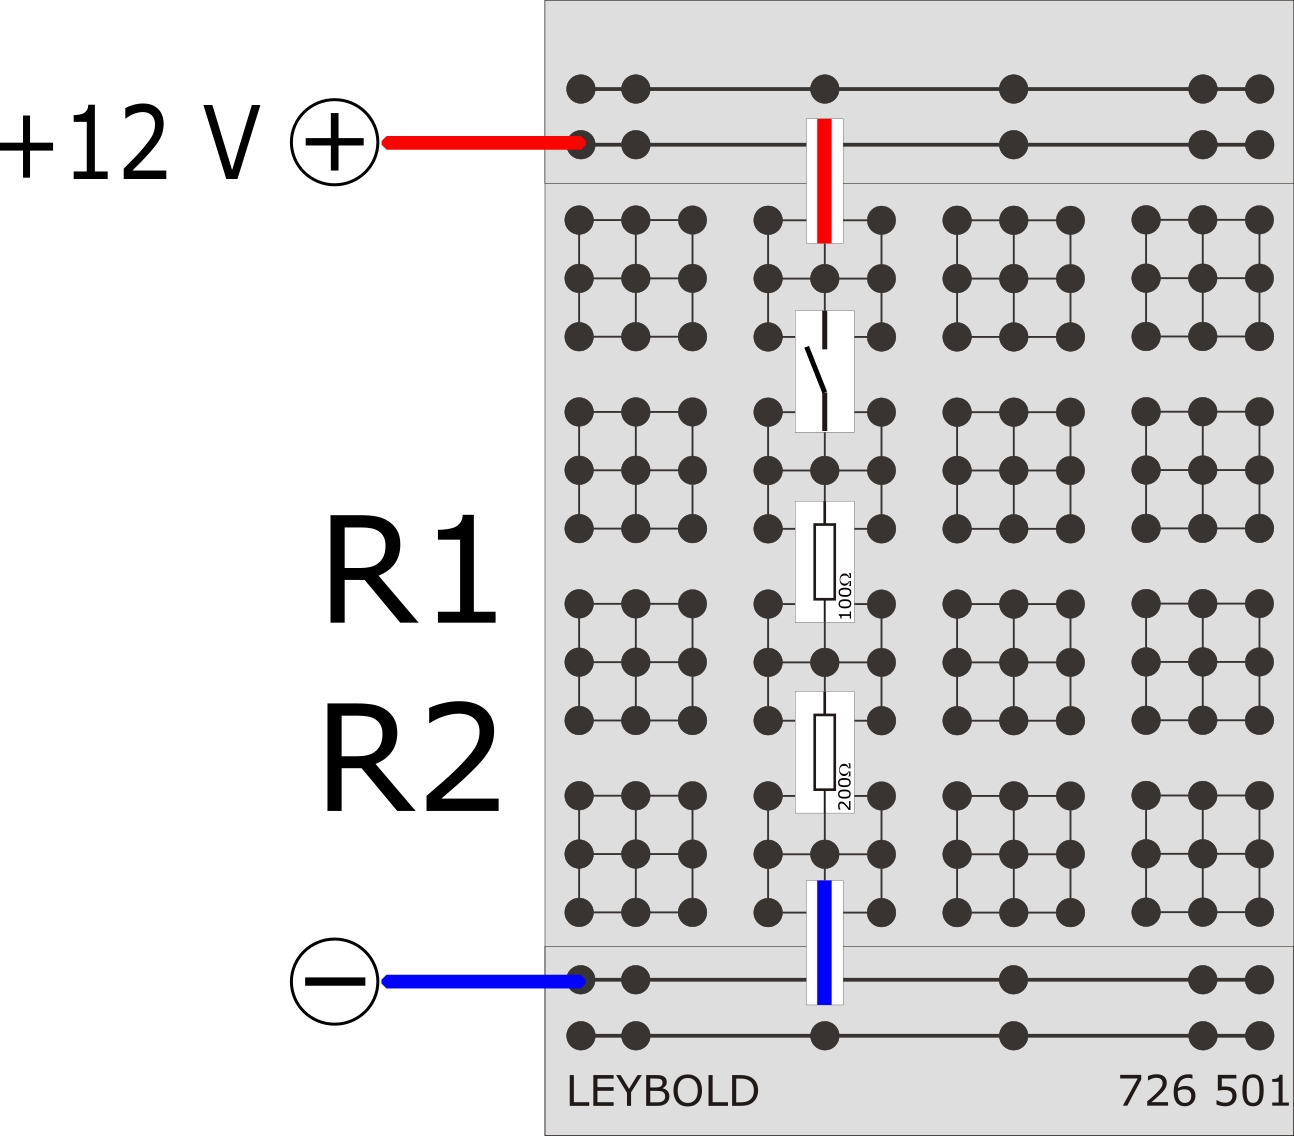 Series connection of resistors